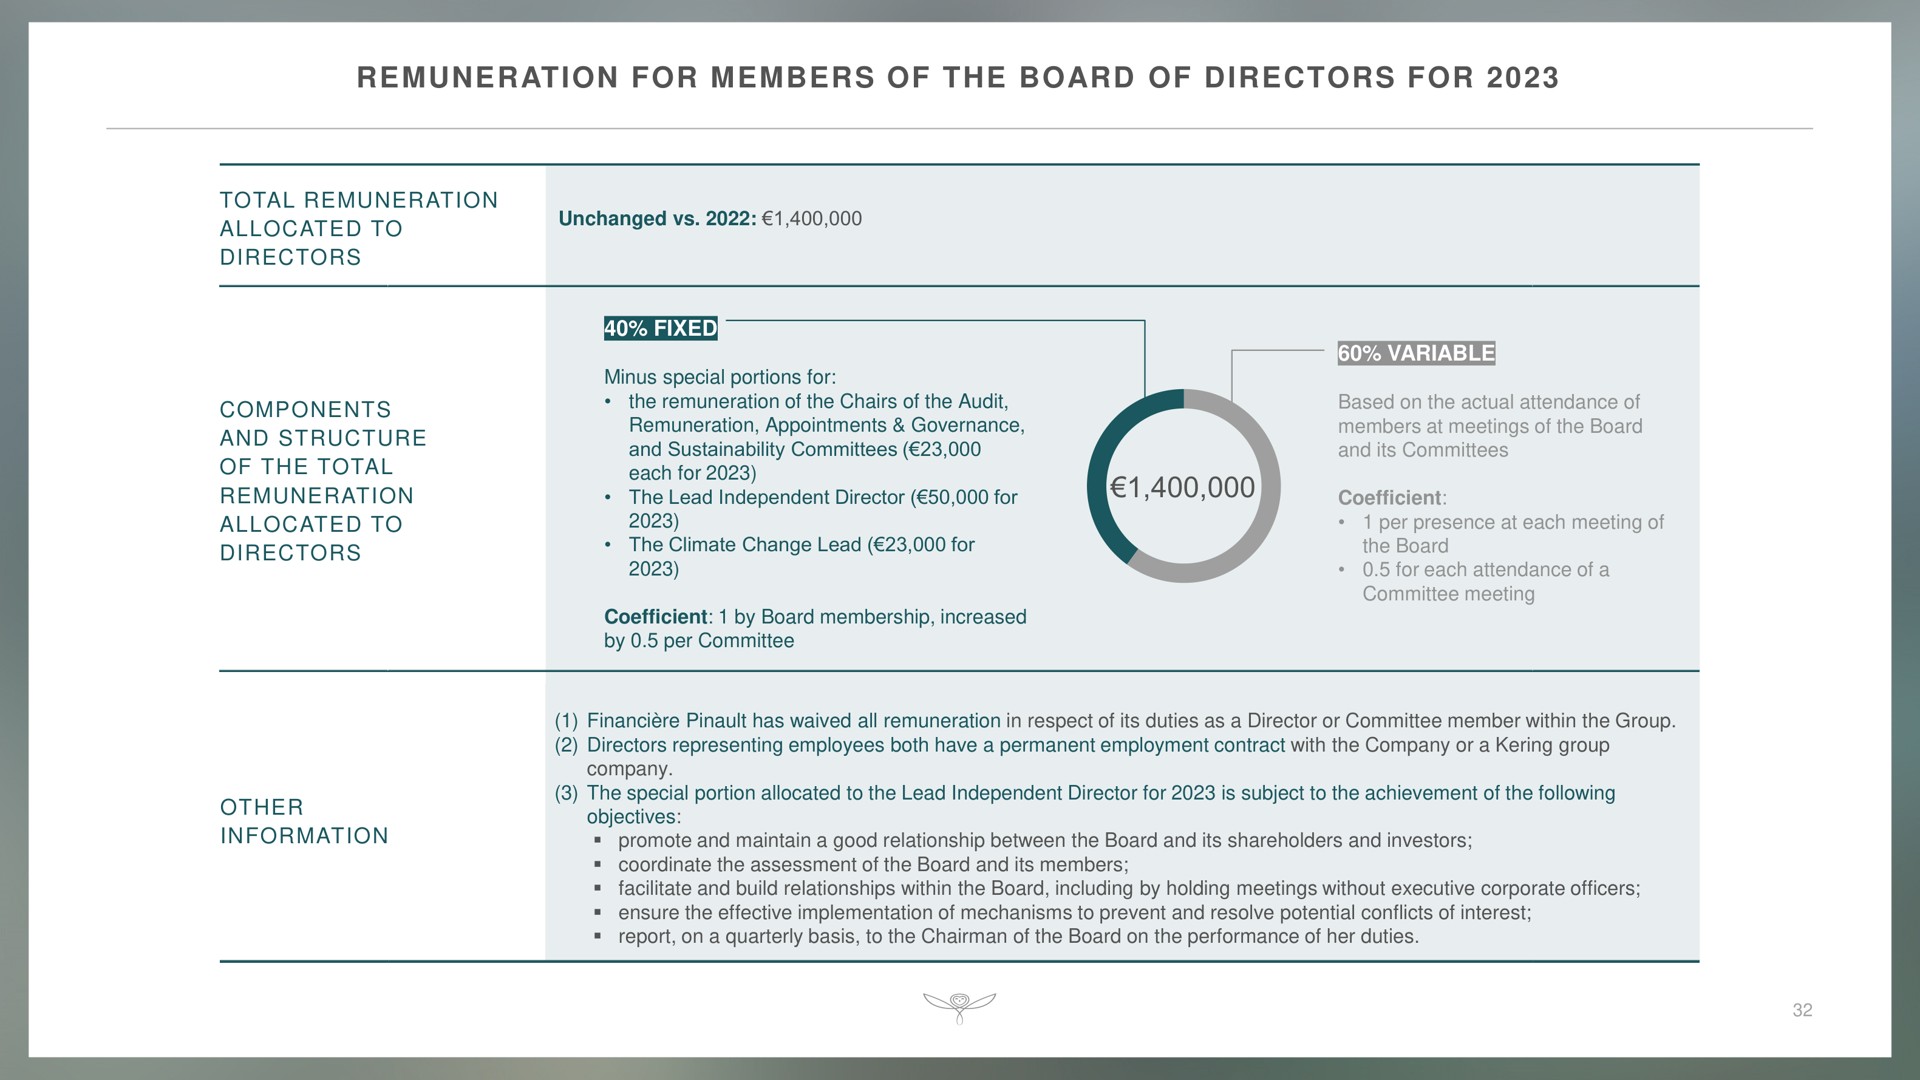 remuneration for members of the board of directors for total each promote and maintain a good relationship between and its shareholders and investors information | Kering